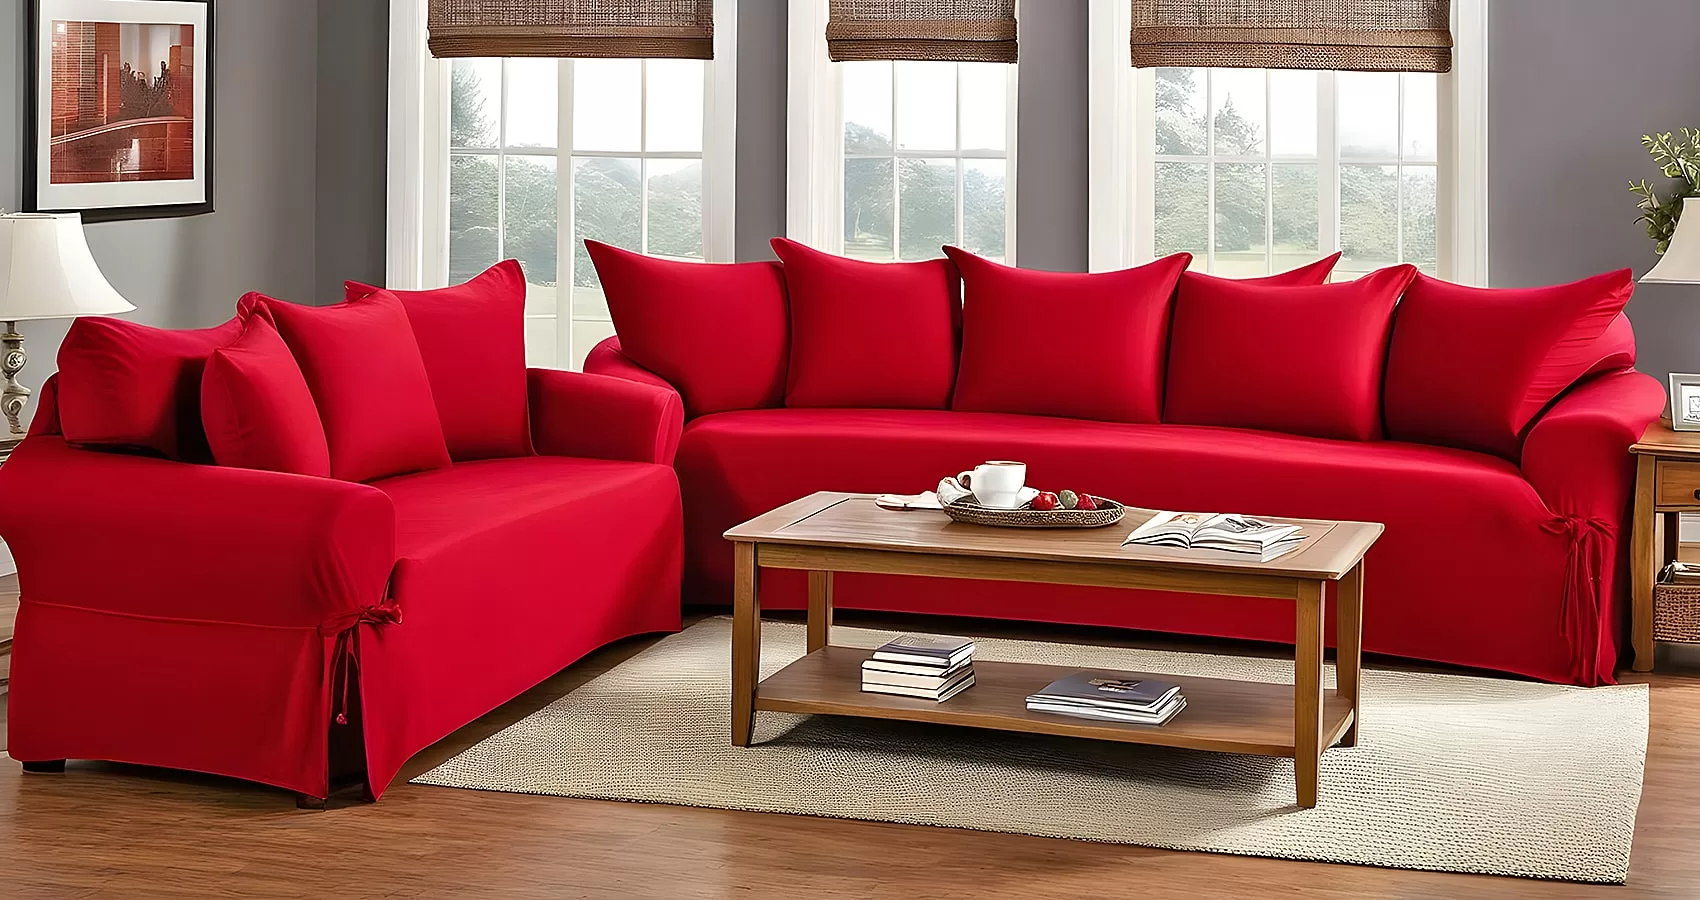 The Allure of Red Couch Covers | Red Sofa Covers